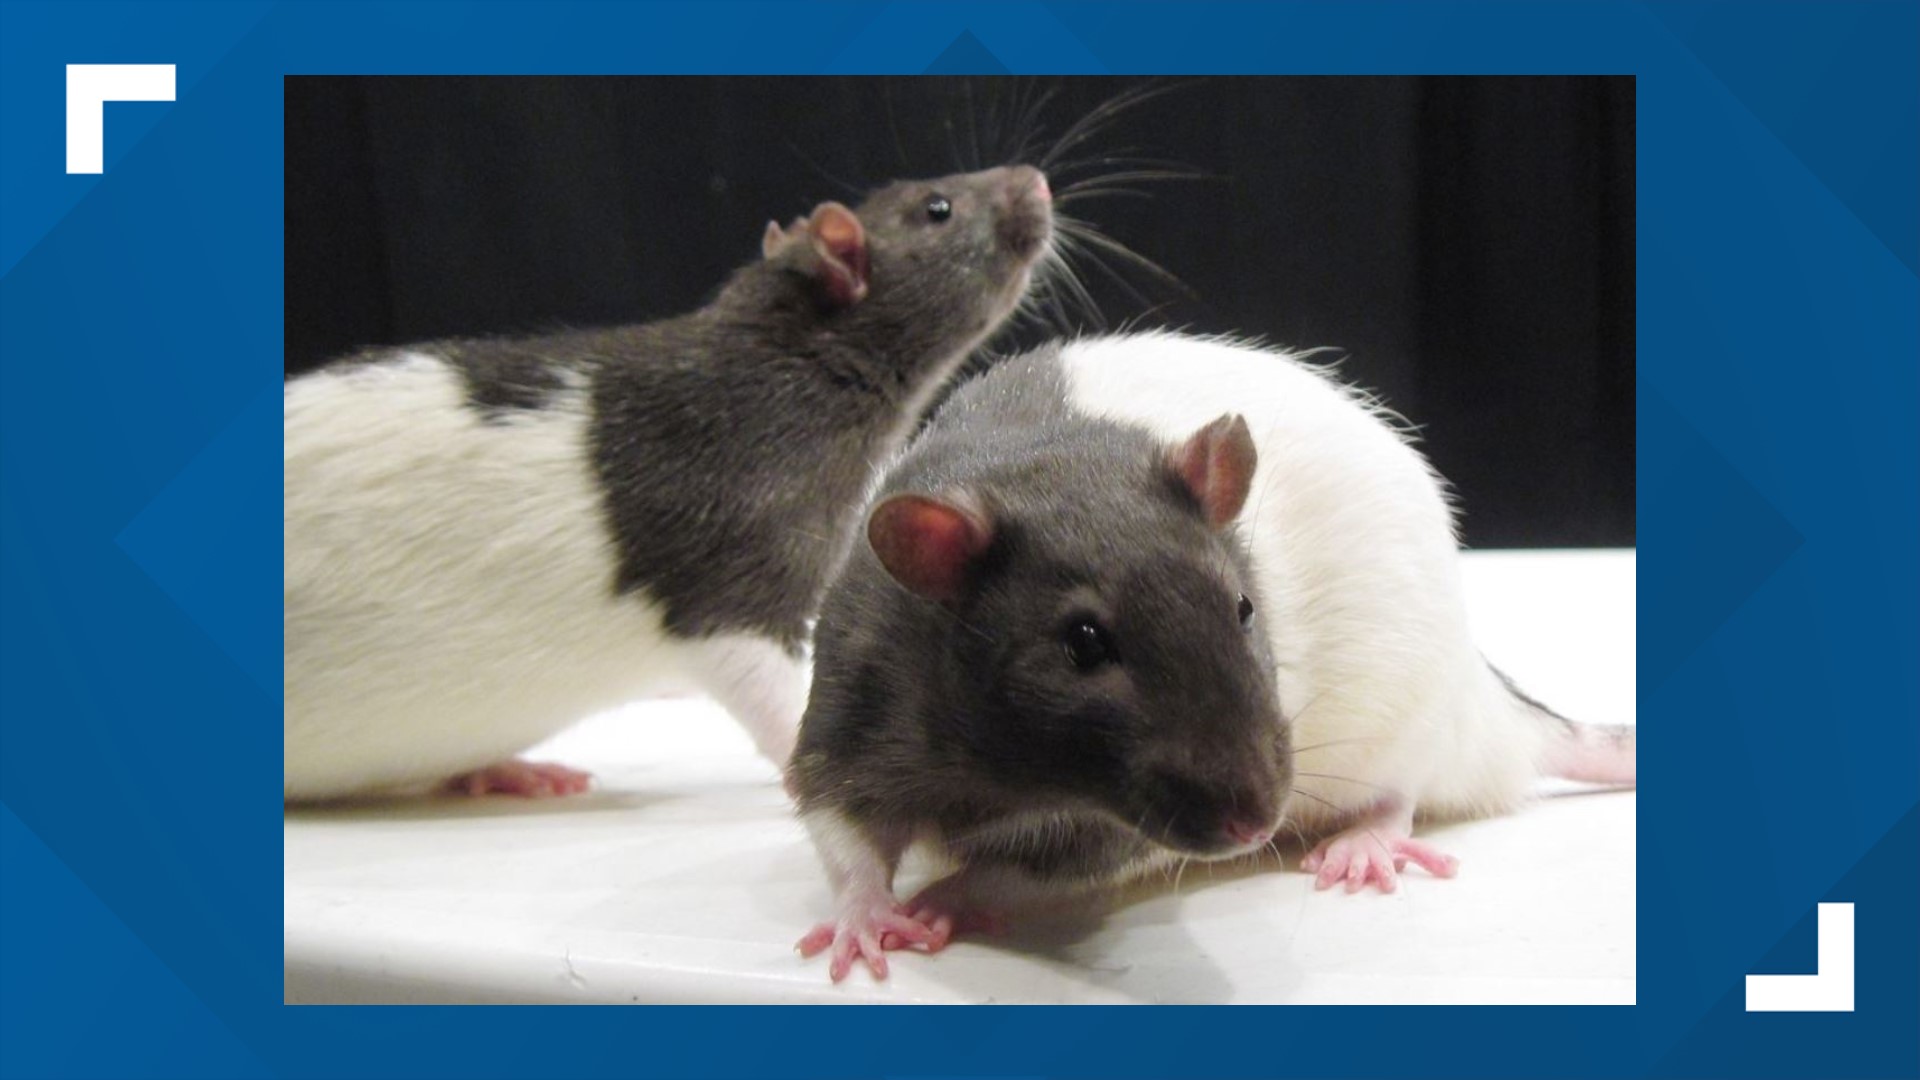 The rats are said to be highly trainable and work great as pets.